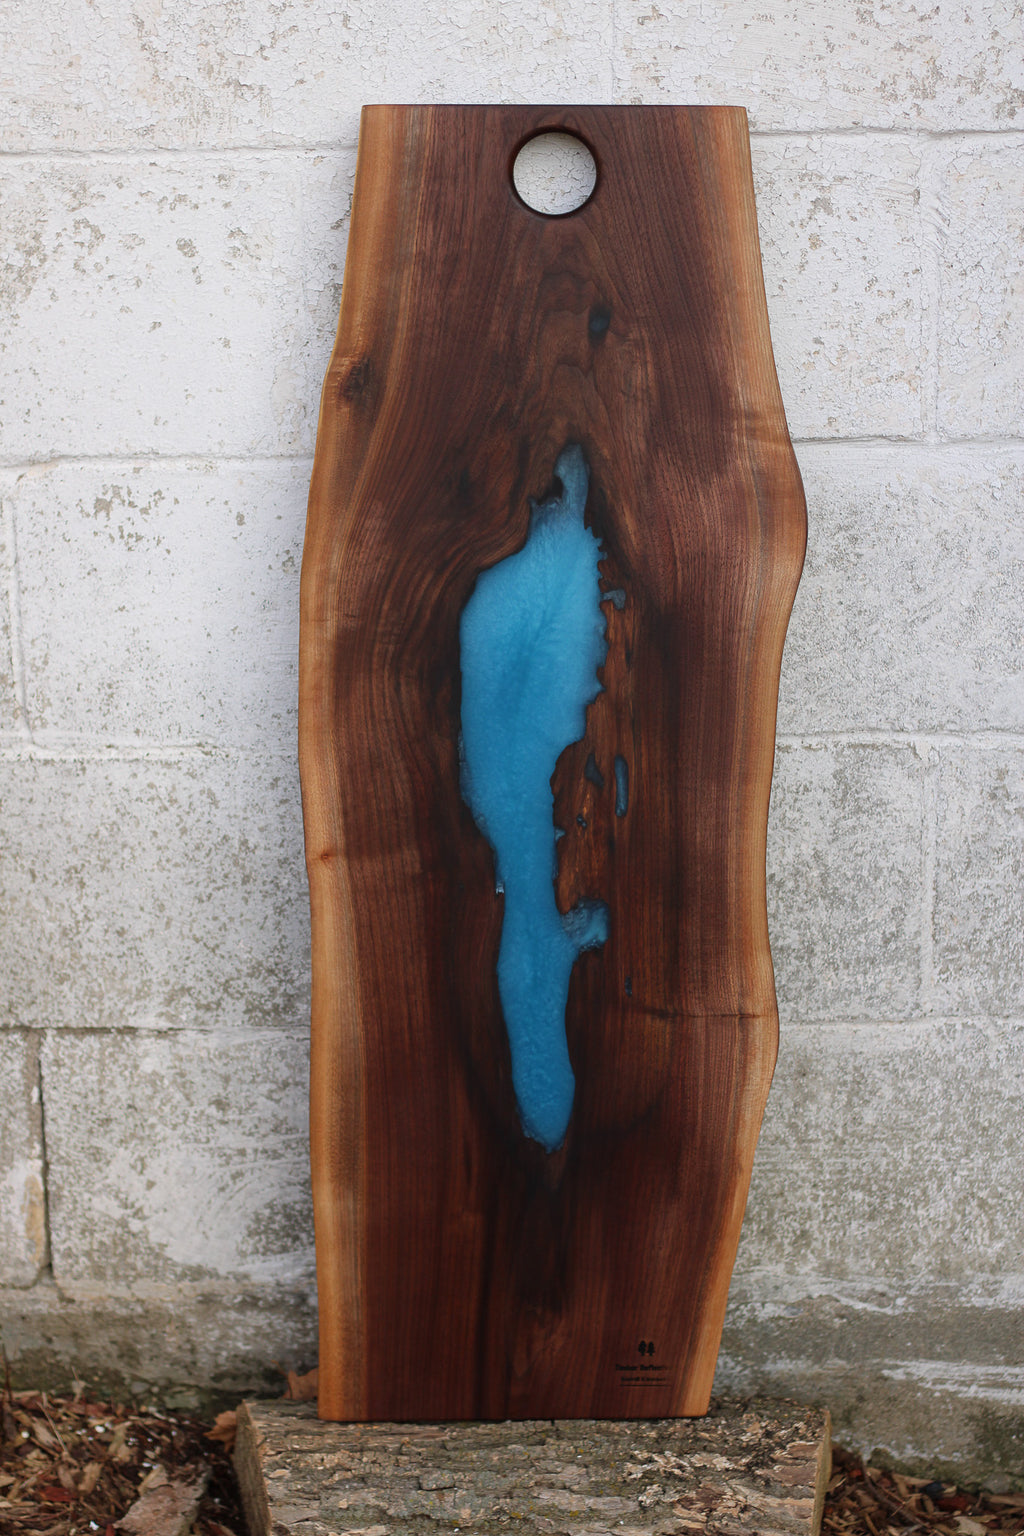 Live Edge Black Walnut Charcuterie Board with Resin Lake.  Back pictured